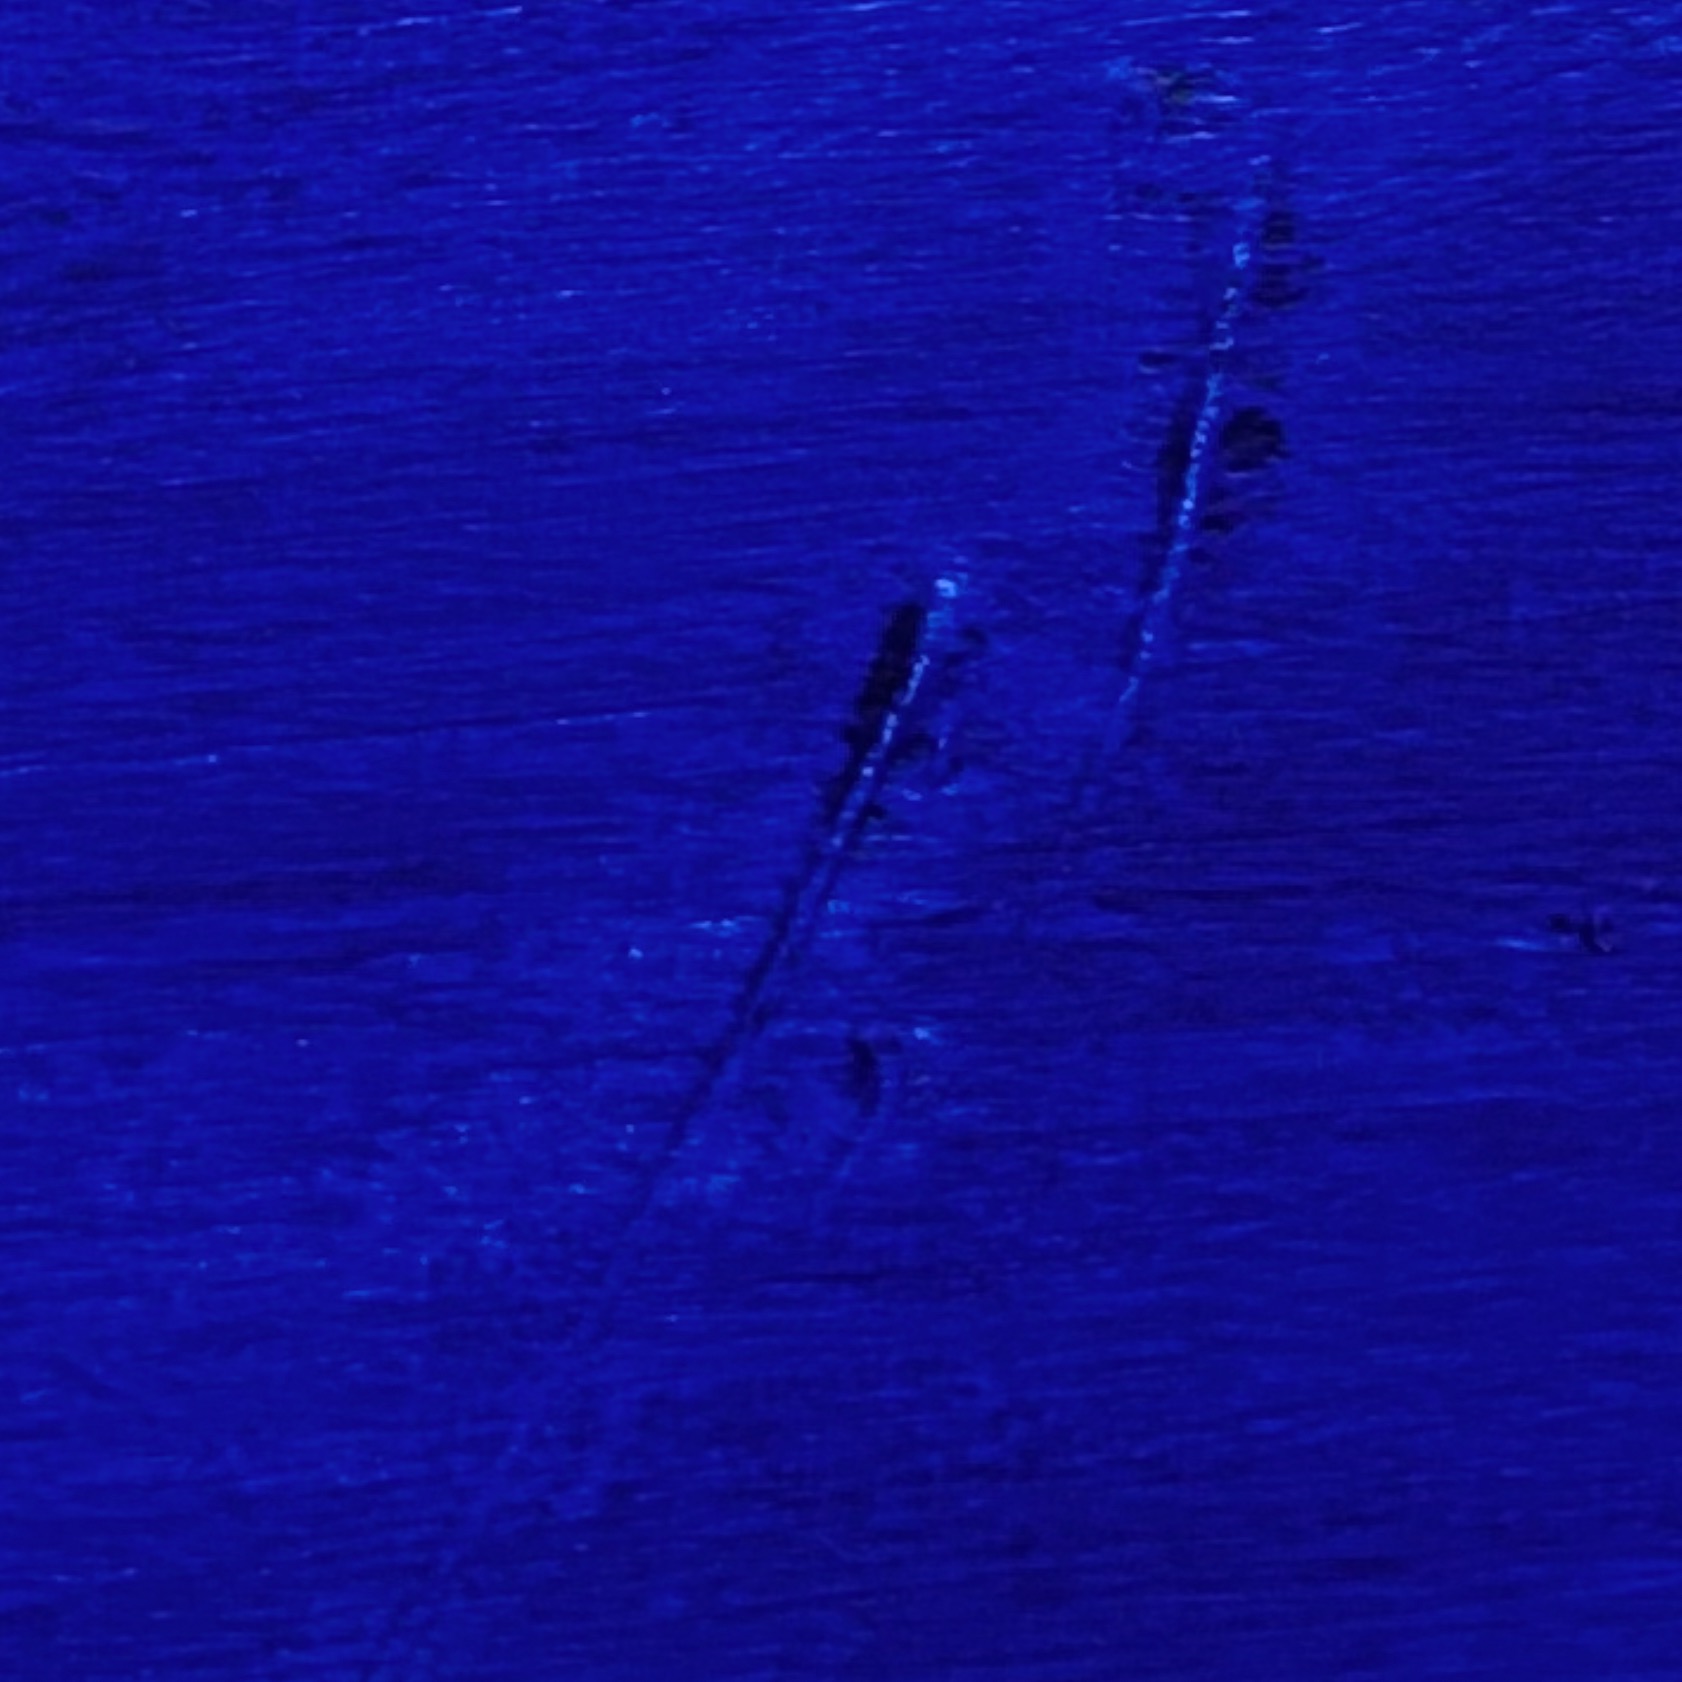 Abstract blue paint with two upward curving lines